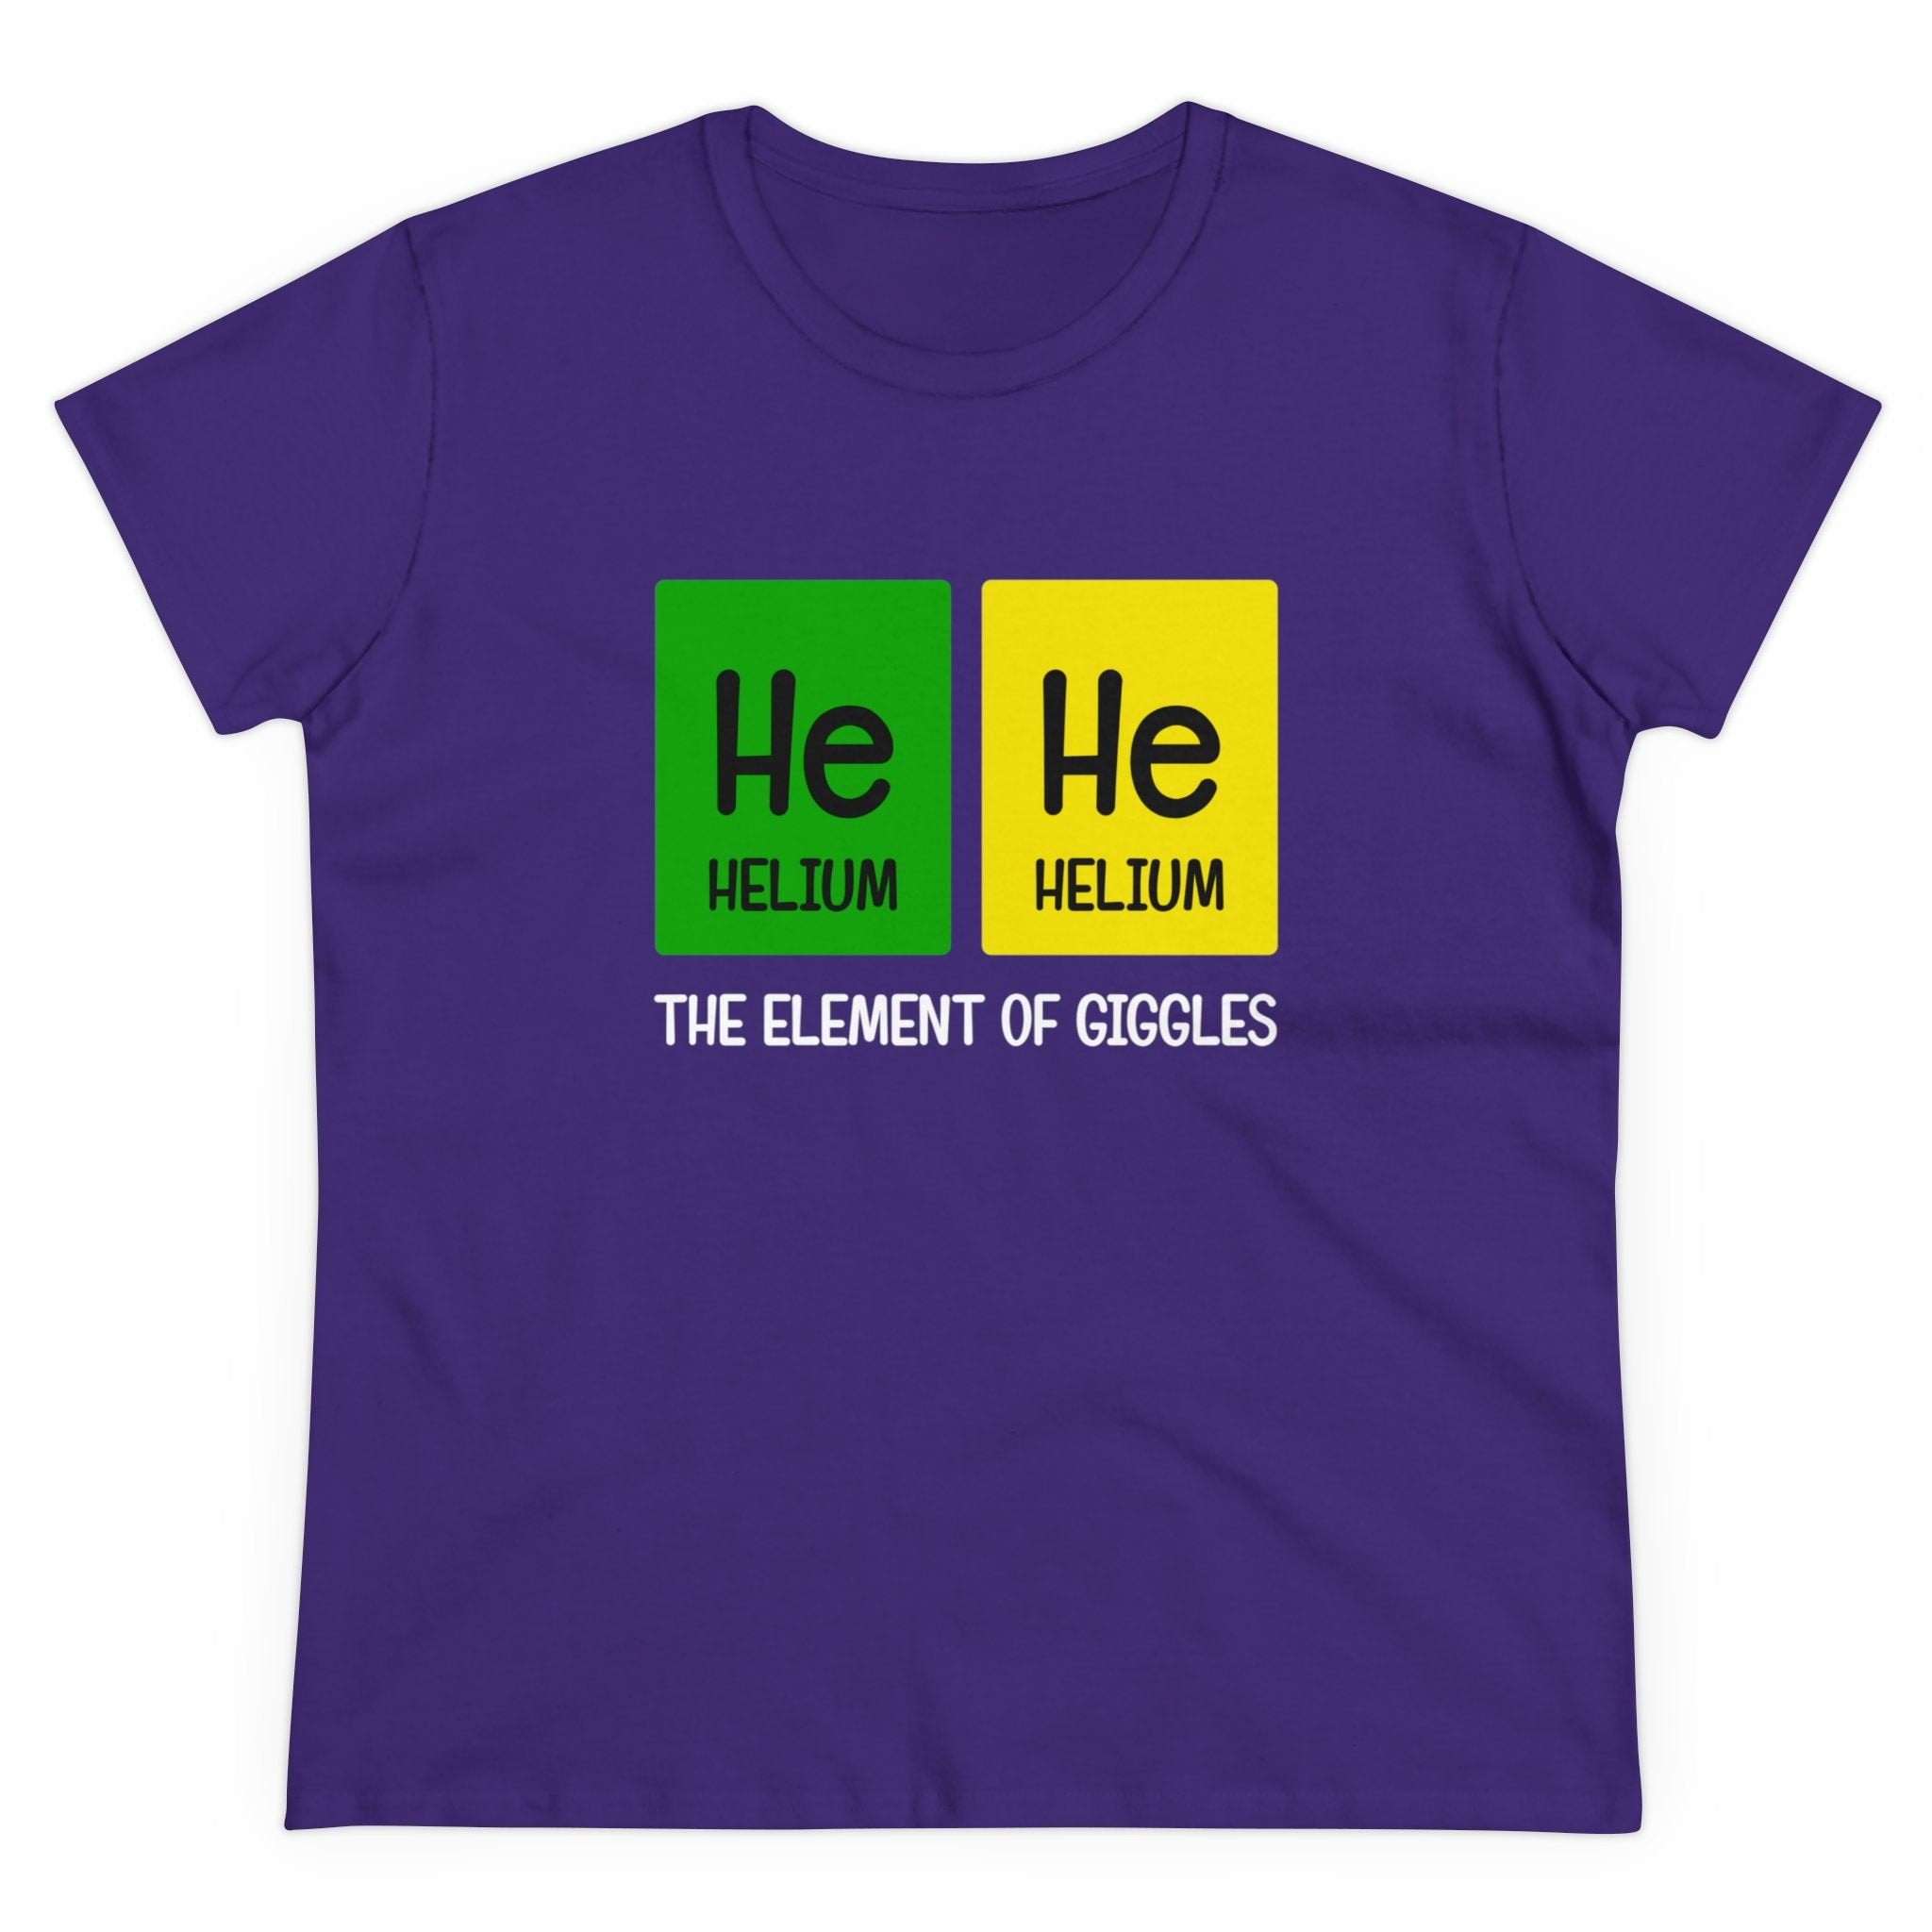 He-He - Women'sTee featuring periodic table elements for Helium (He) arranged to spell "He He" and the text "The Element of Giggles" below, made from ethically grown US cotton for a chic and comfy feel.